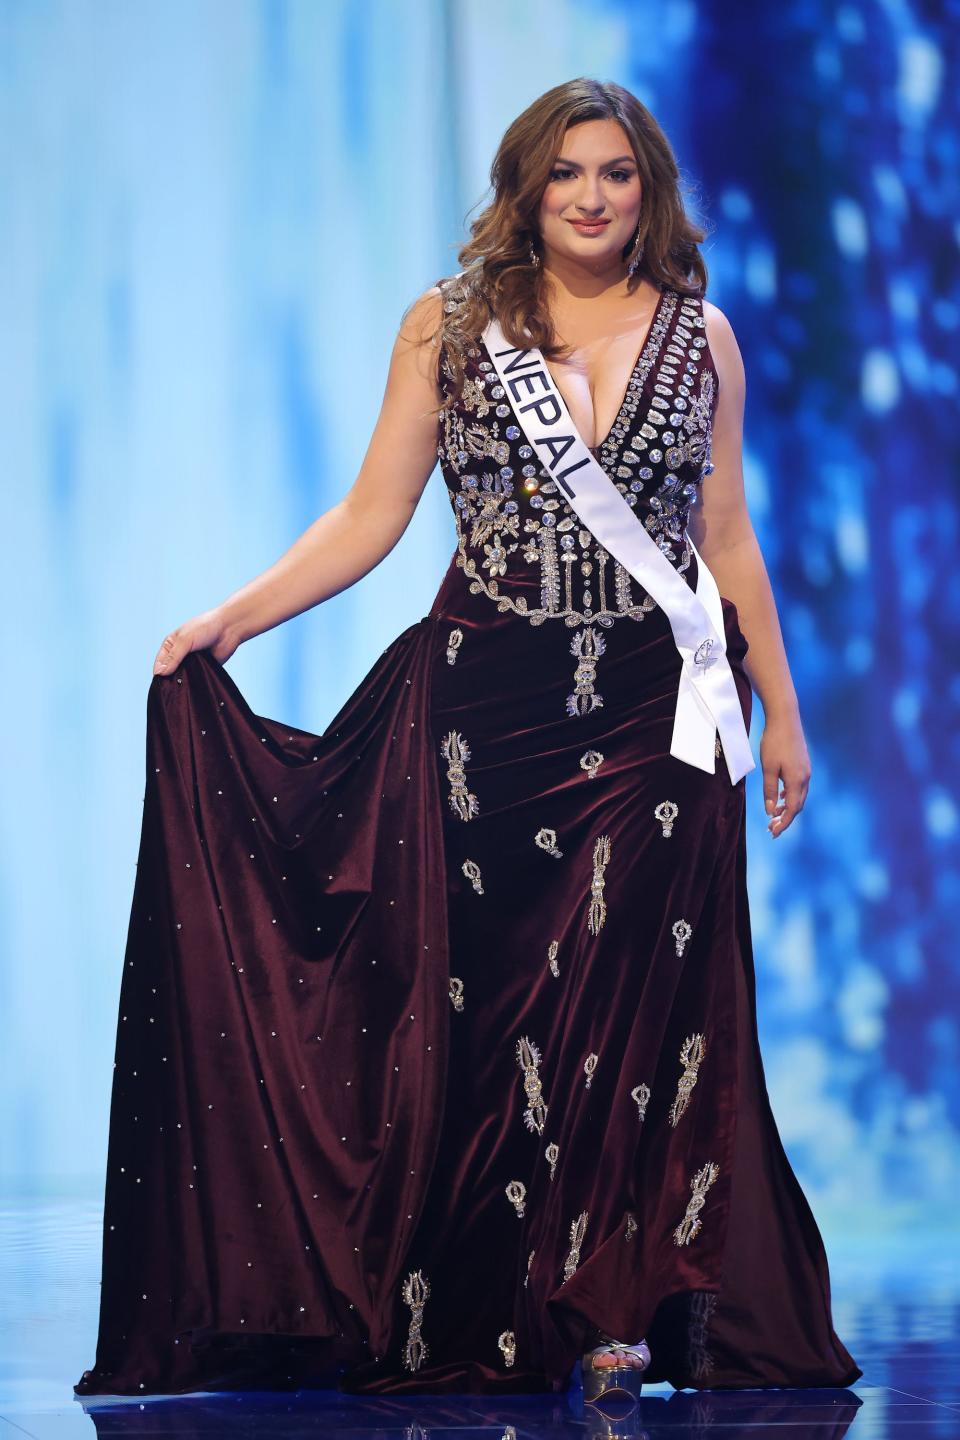 I'm the first plussized woman to compete at Miss Universe and I made